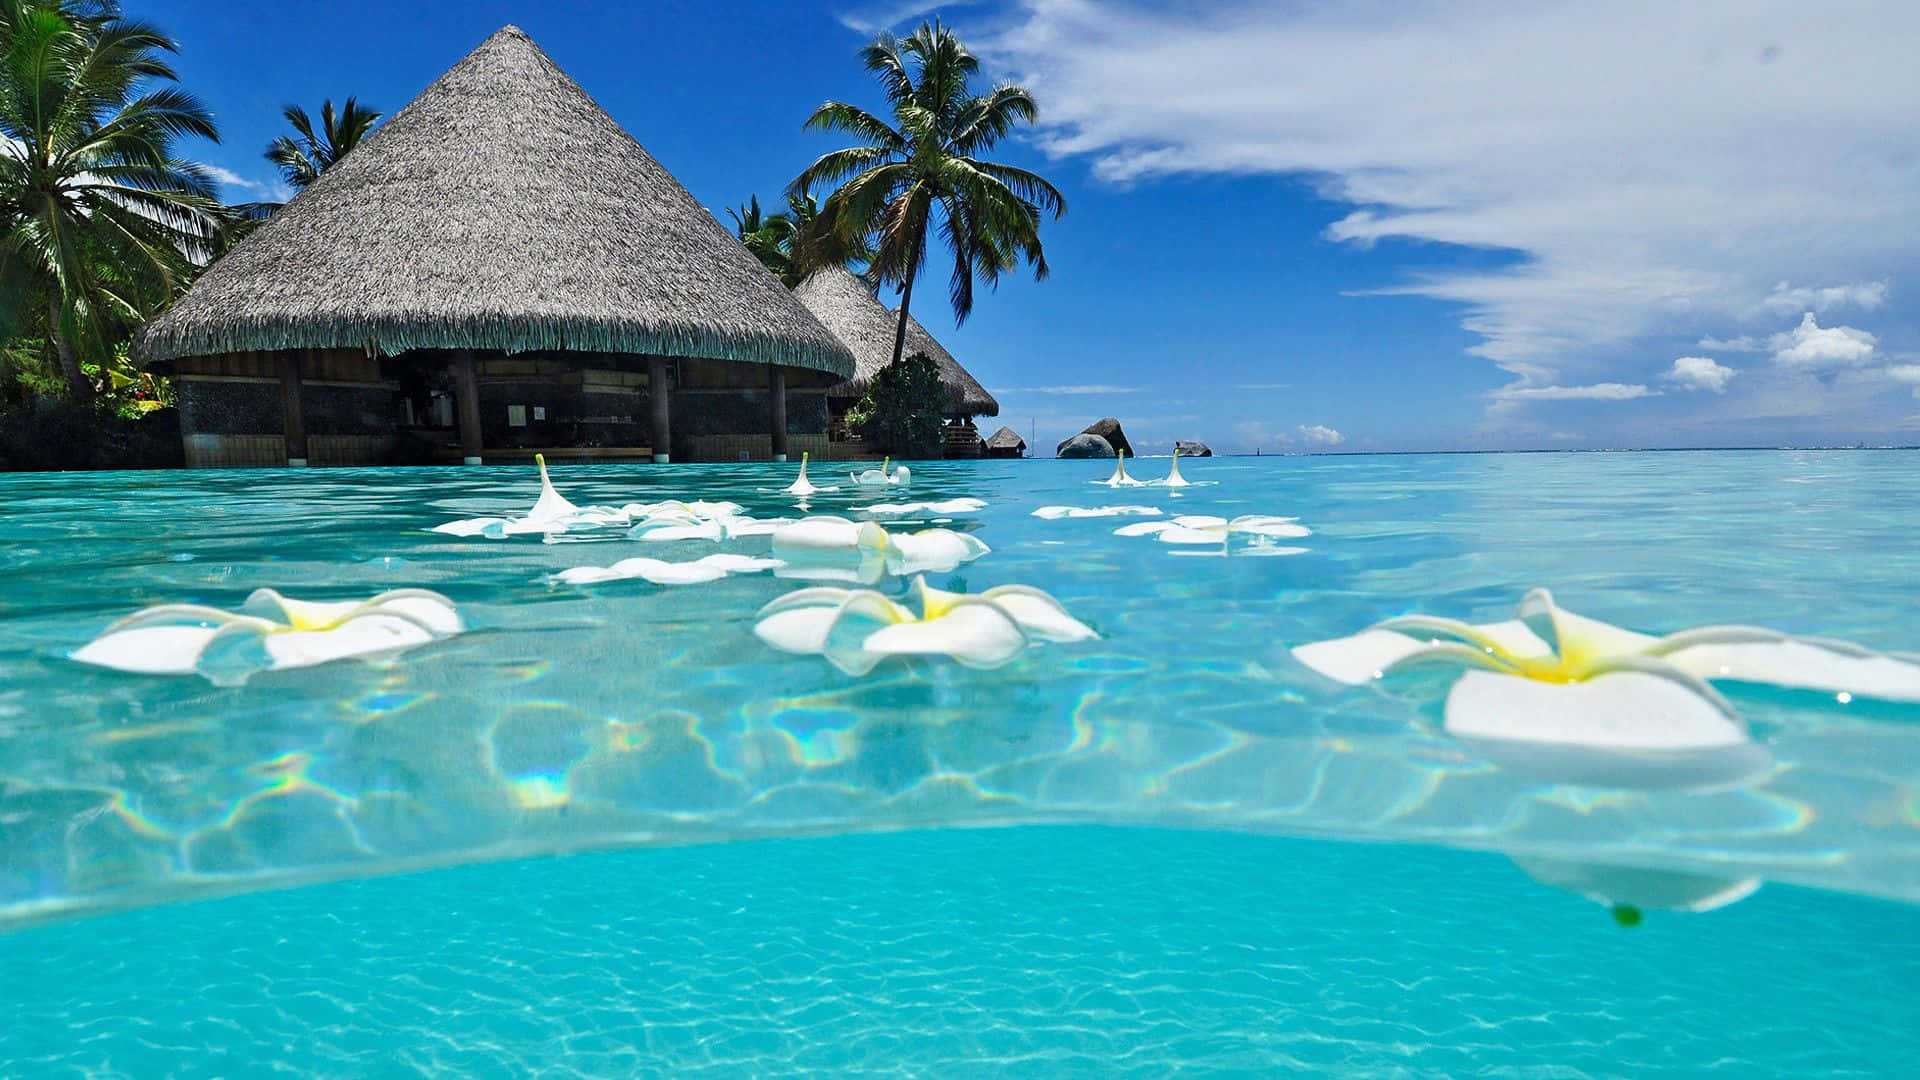 Enjoy a Relaxing Day on the Stunningly Beautiful Tropical Beach